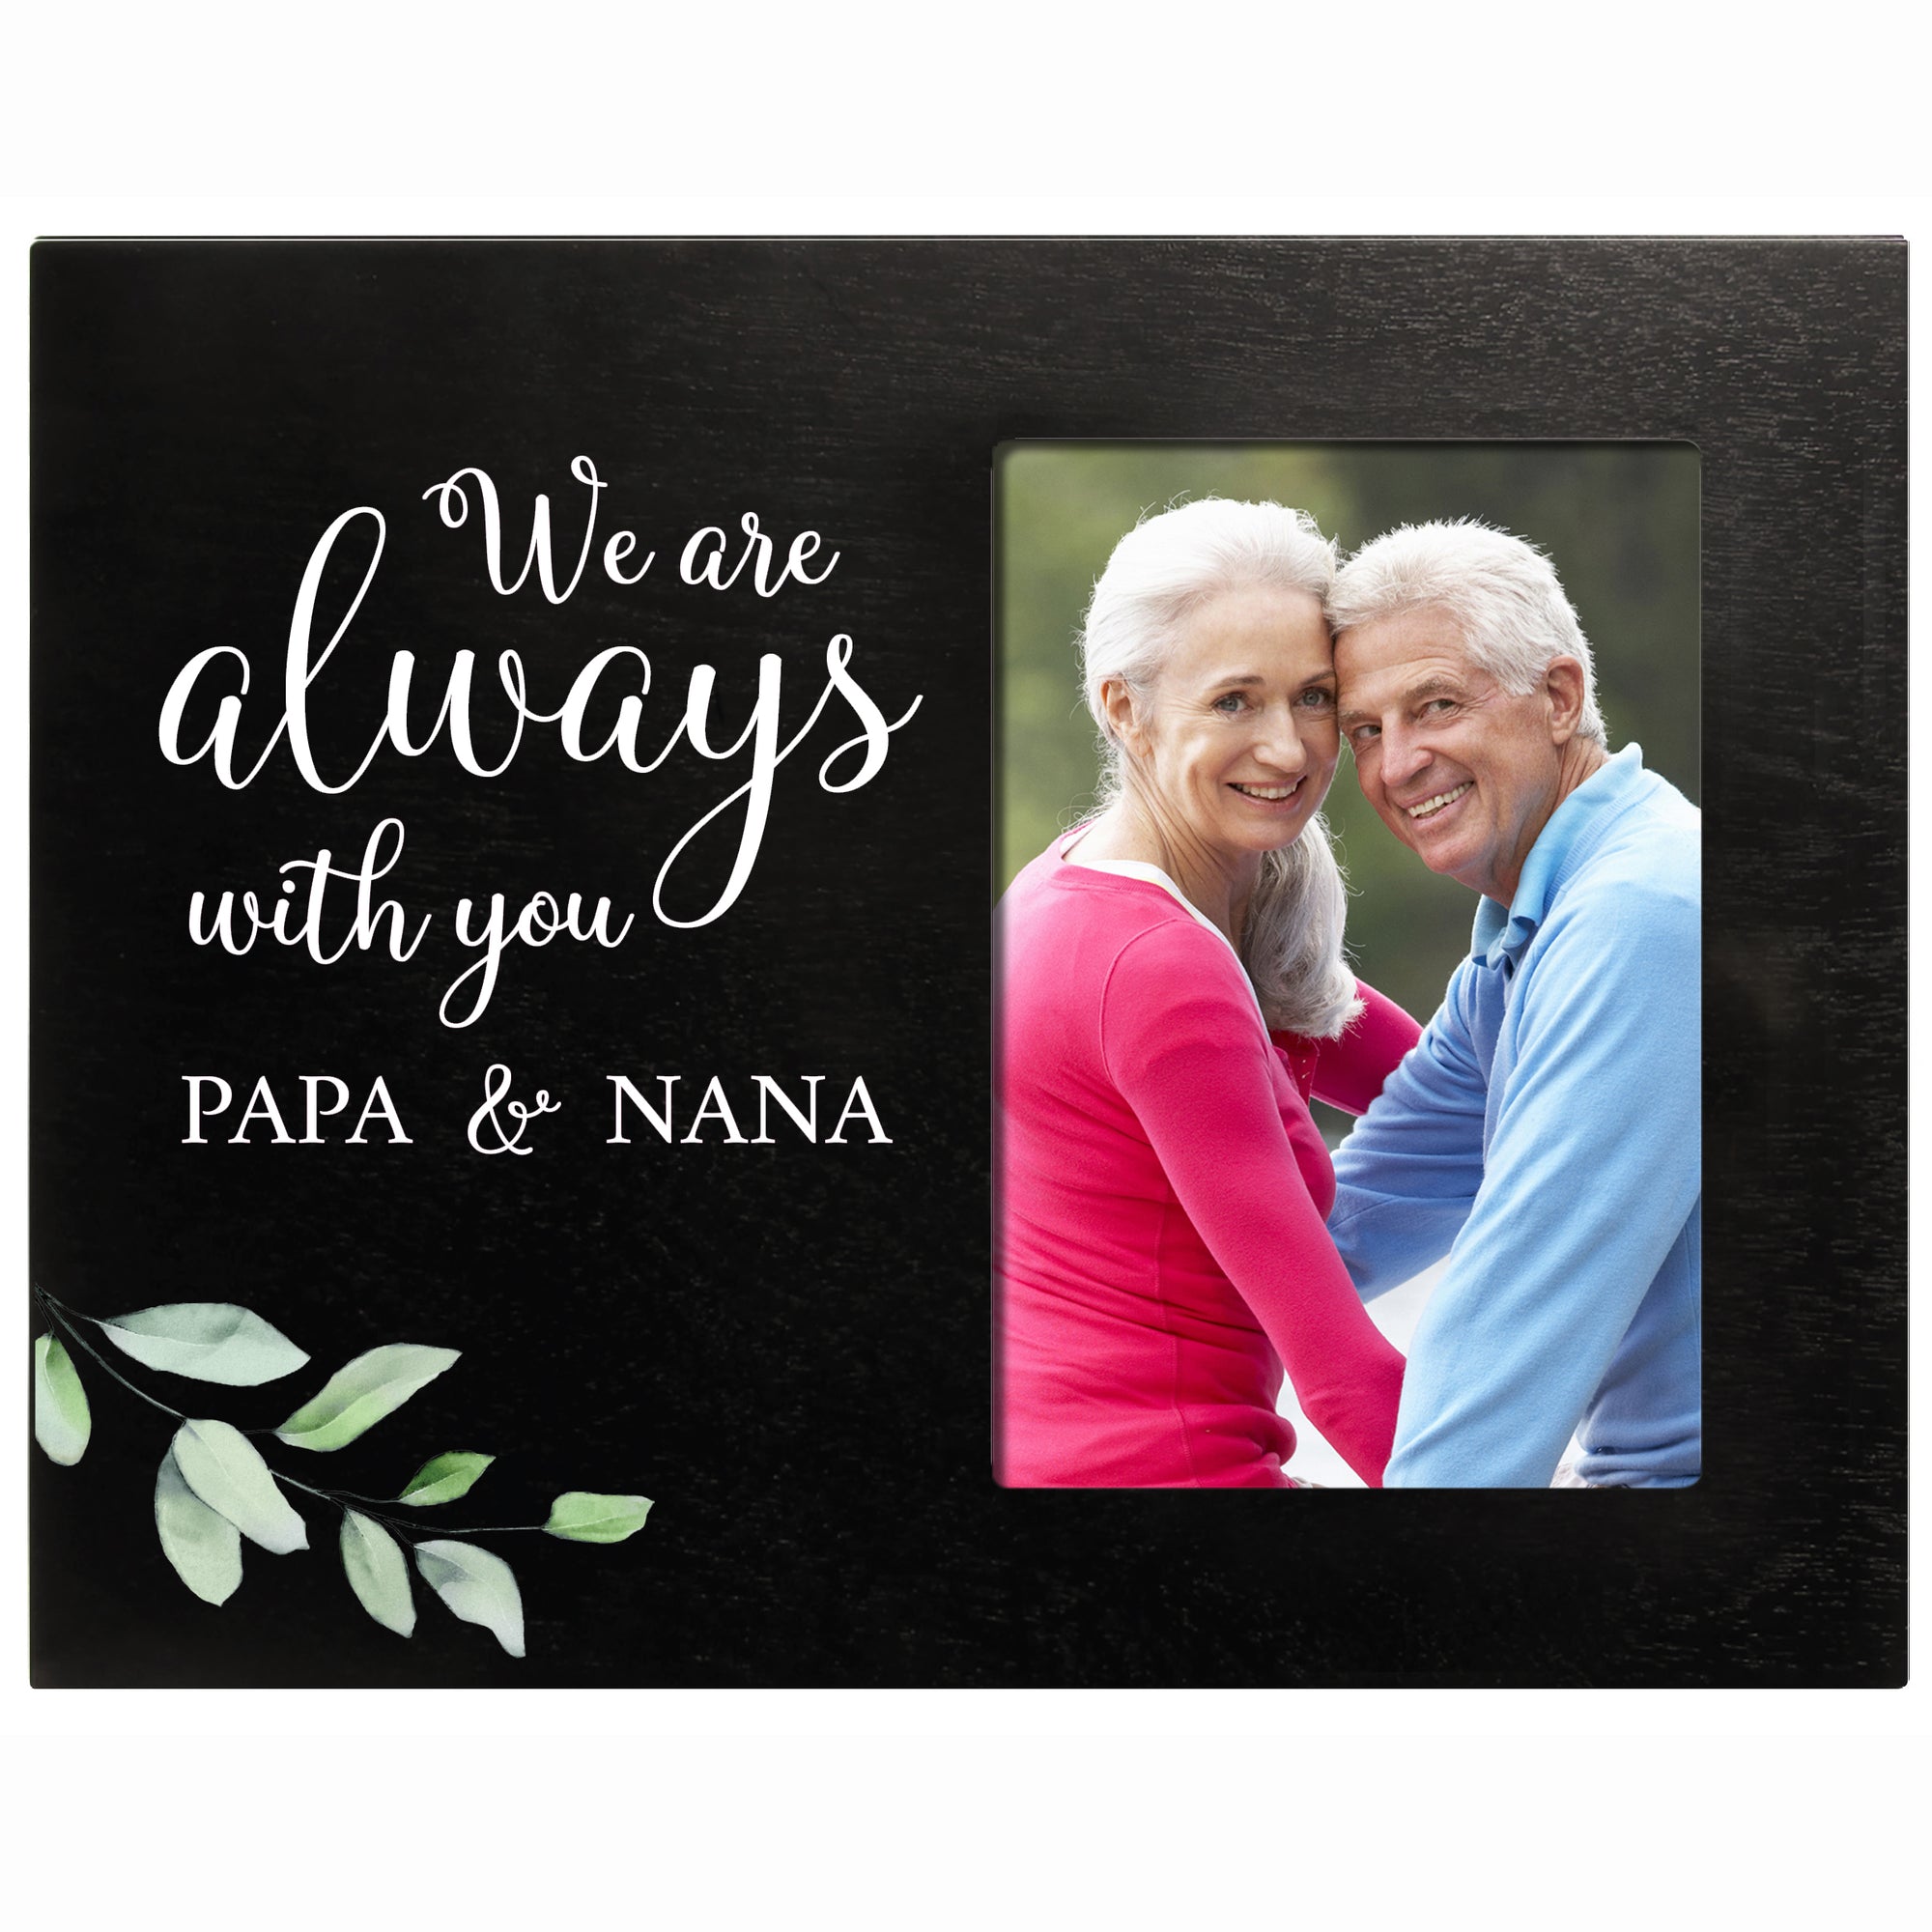 Sentimental Human Memorial Photo Frame Gift Bereavement Gift Idea - We Are Always With